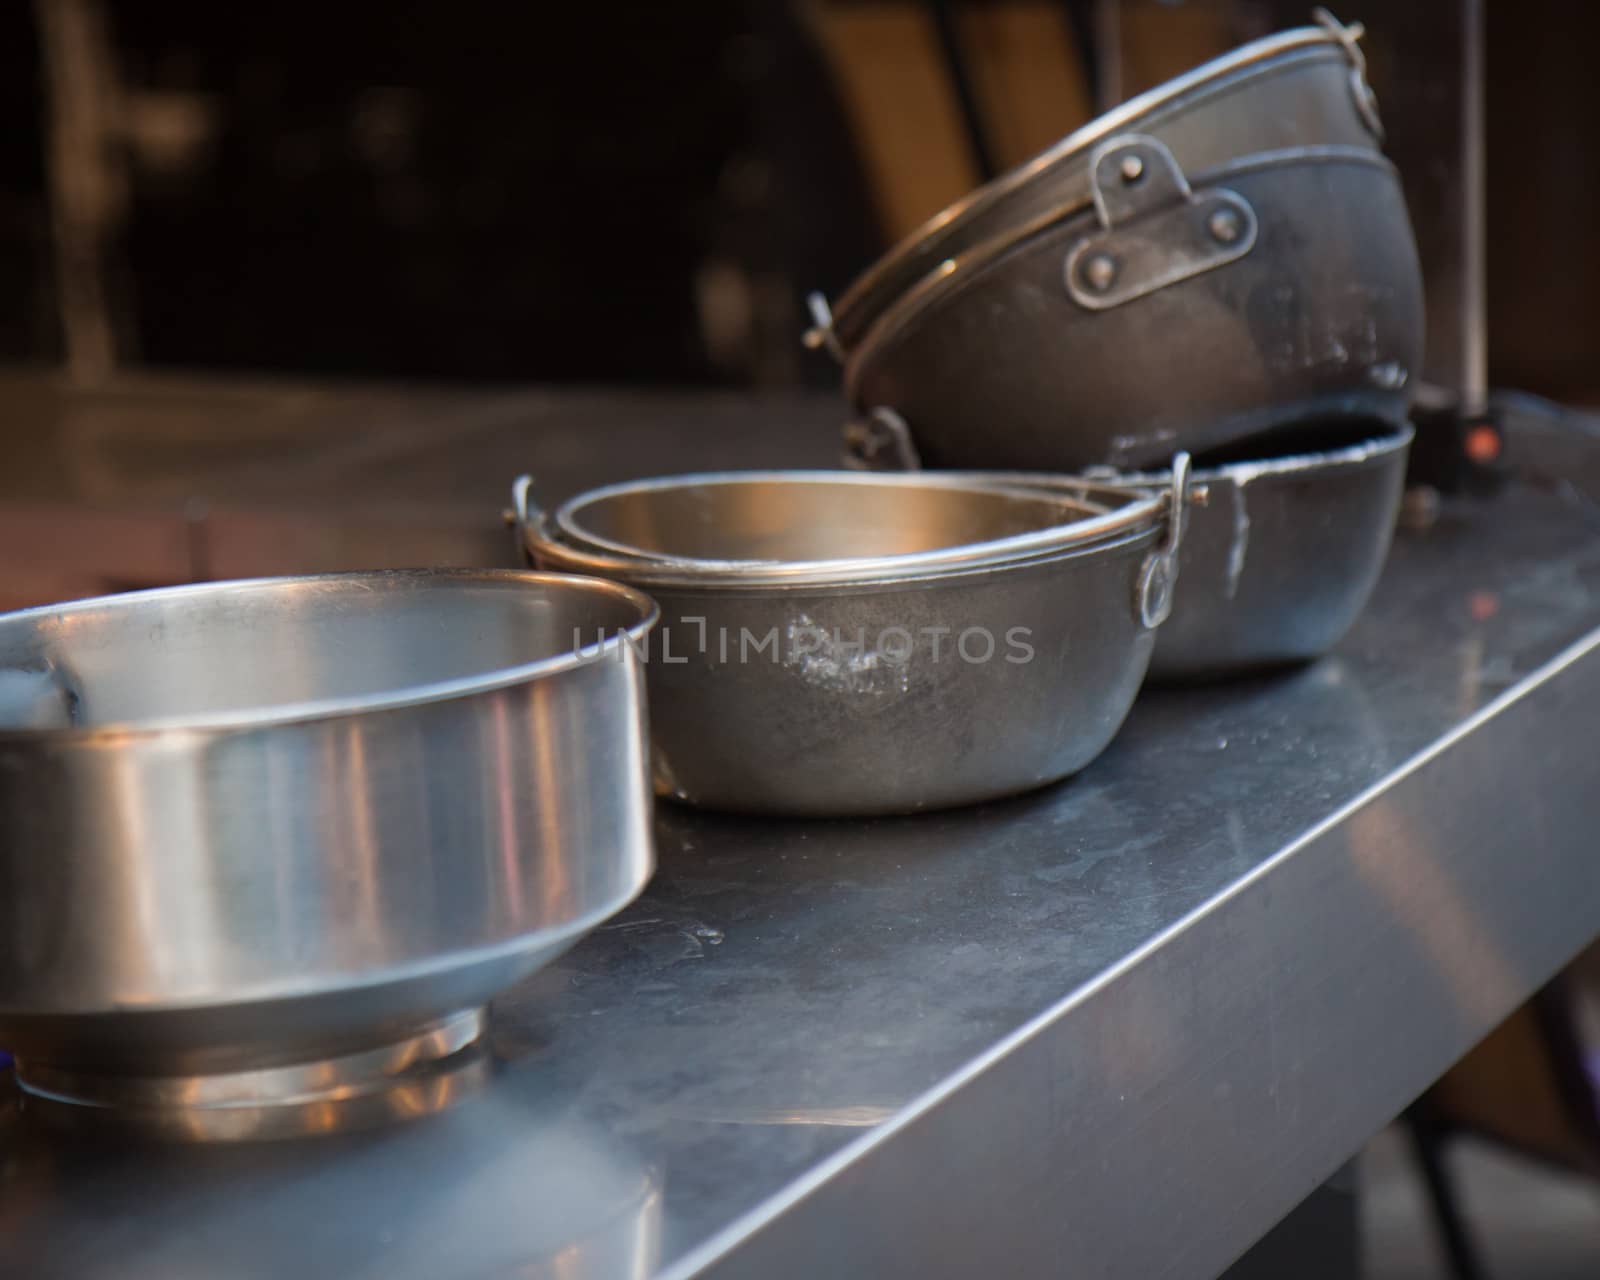 Pots at a night market by imagesbykenny